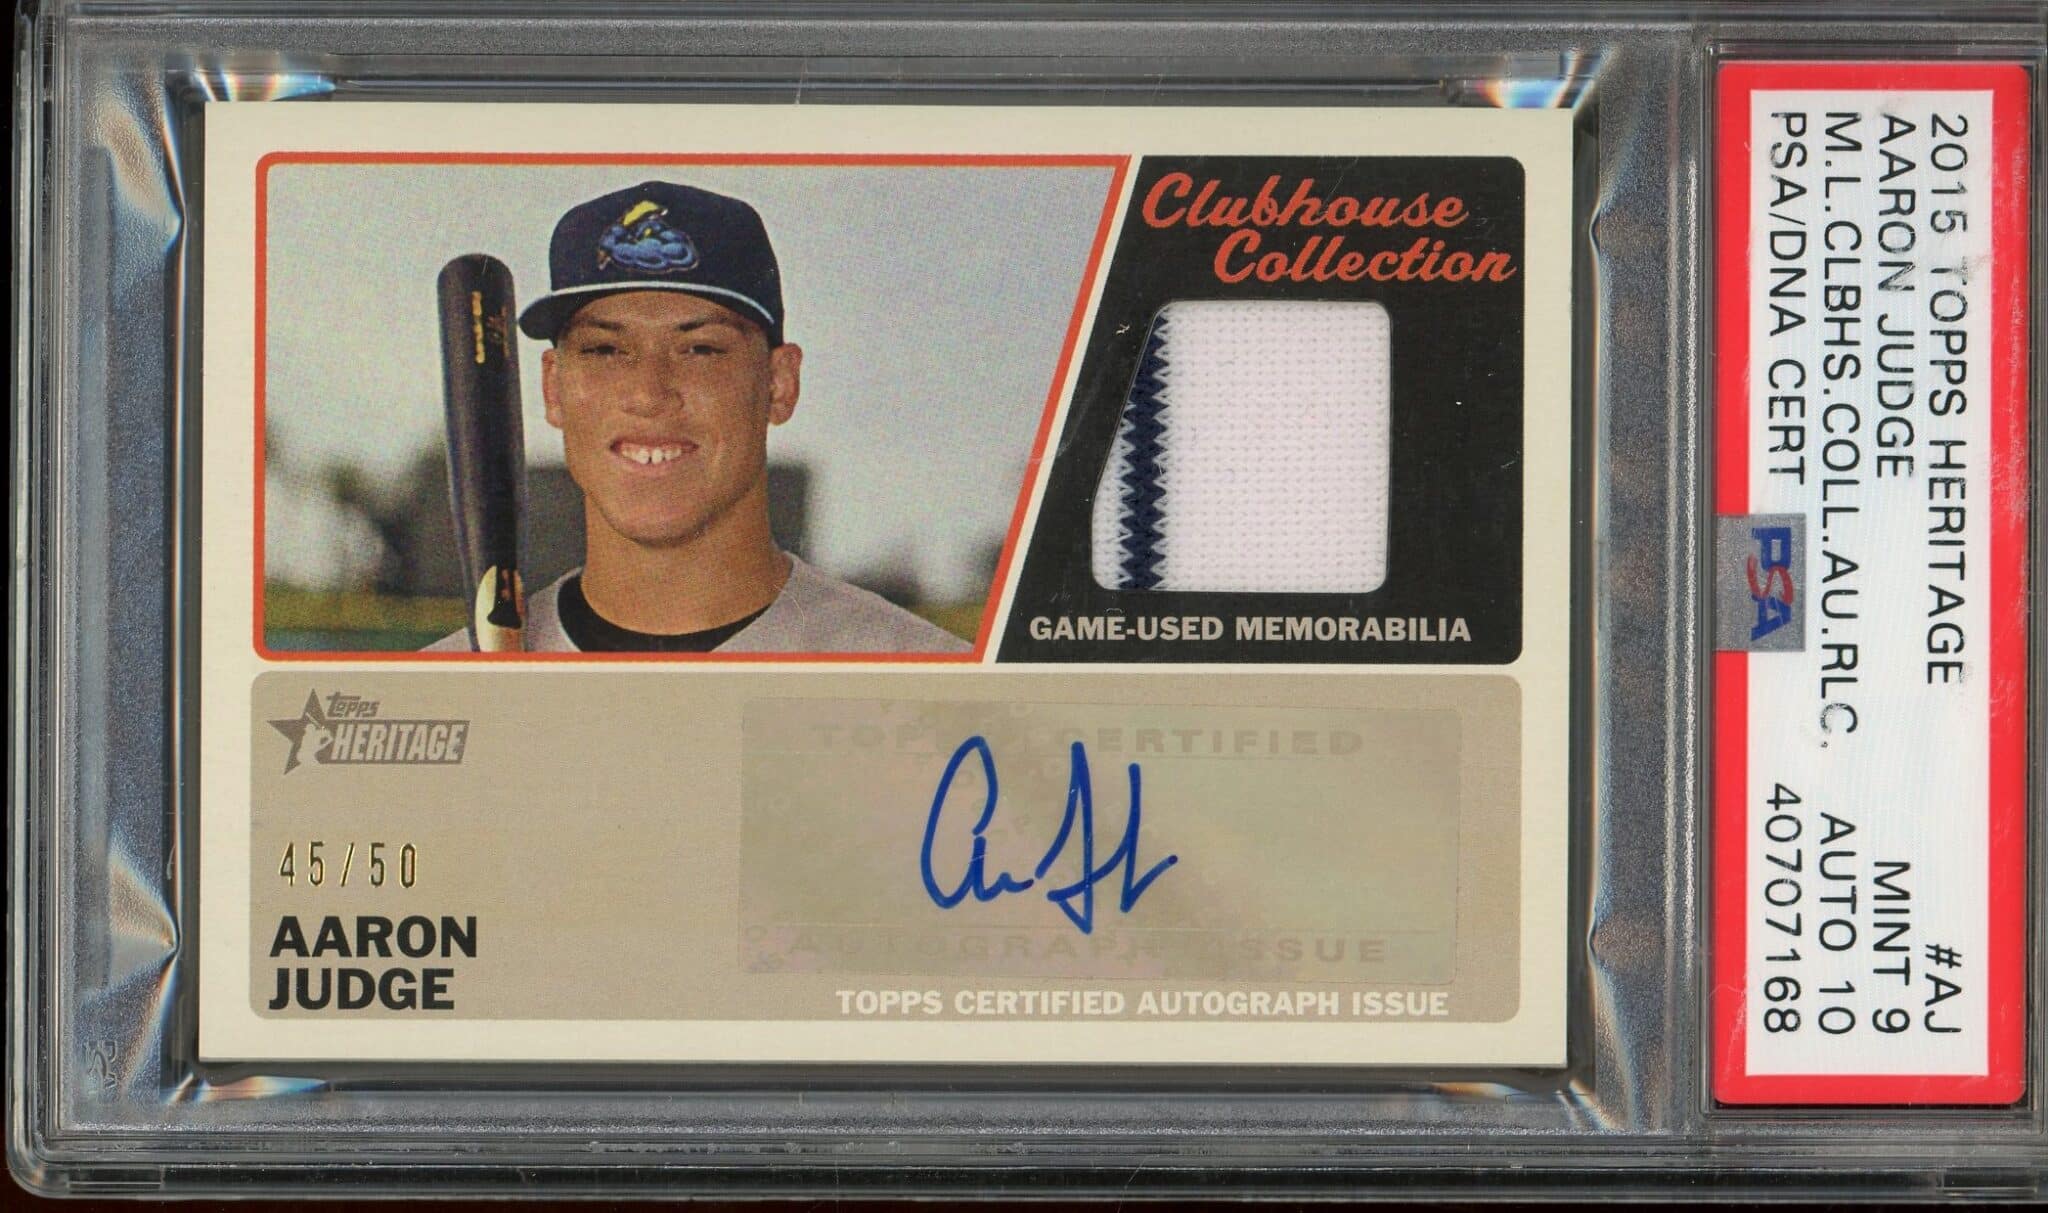 MLB Youth Foundation Golf Auction - Aaron Judge Autographed